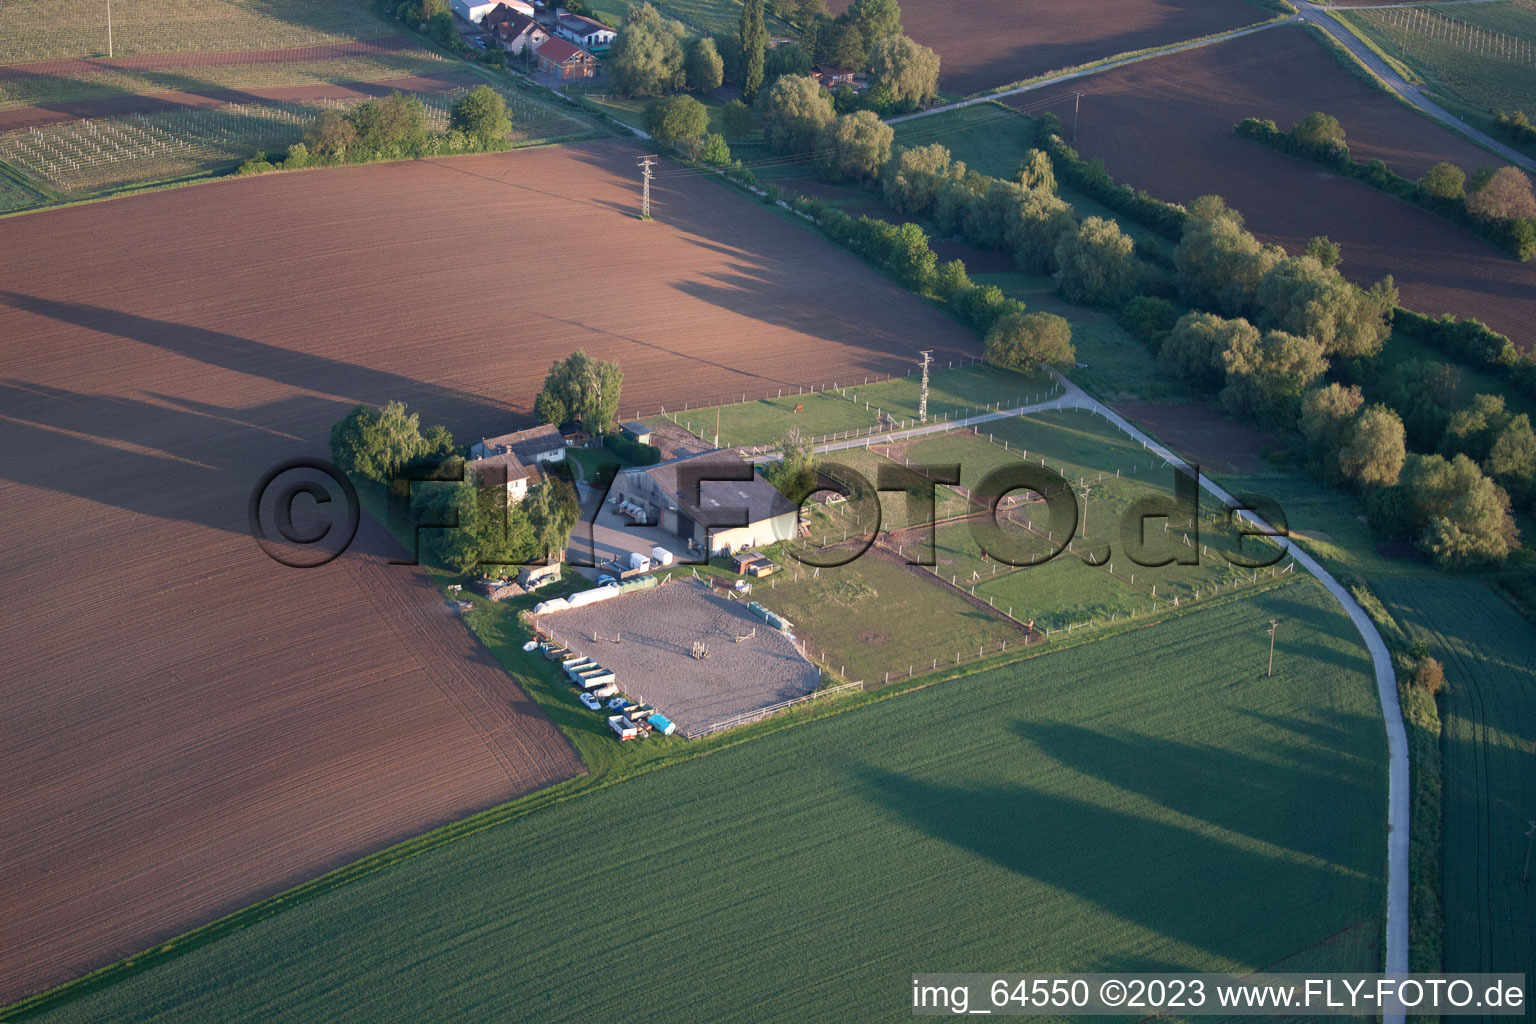 Aerial photograpy of Impflingen in the state Rhineland-Palatinate, Germany